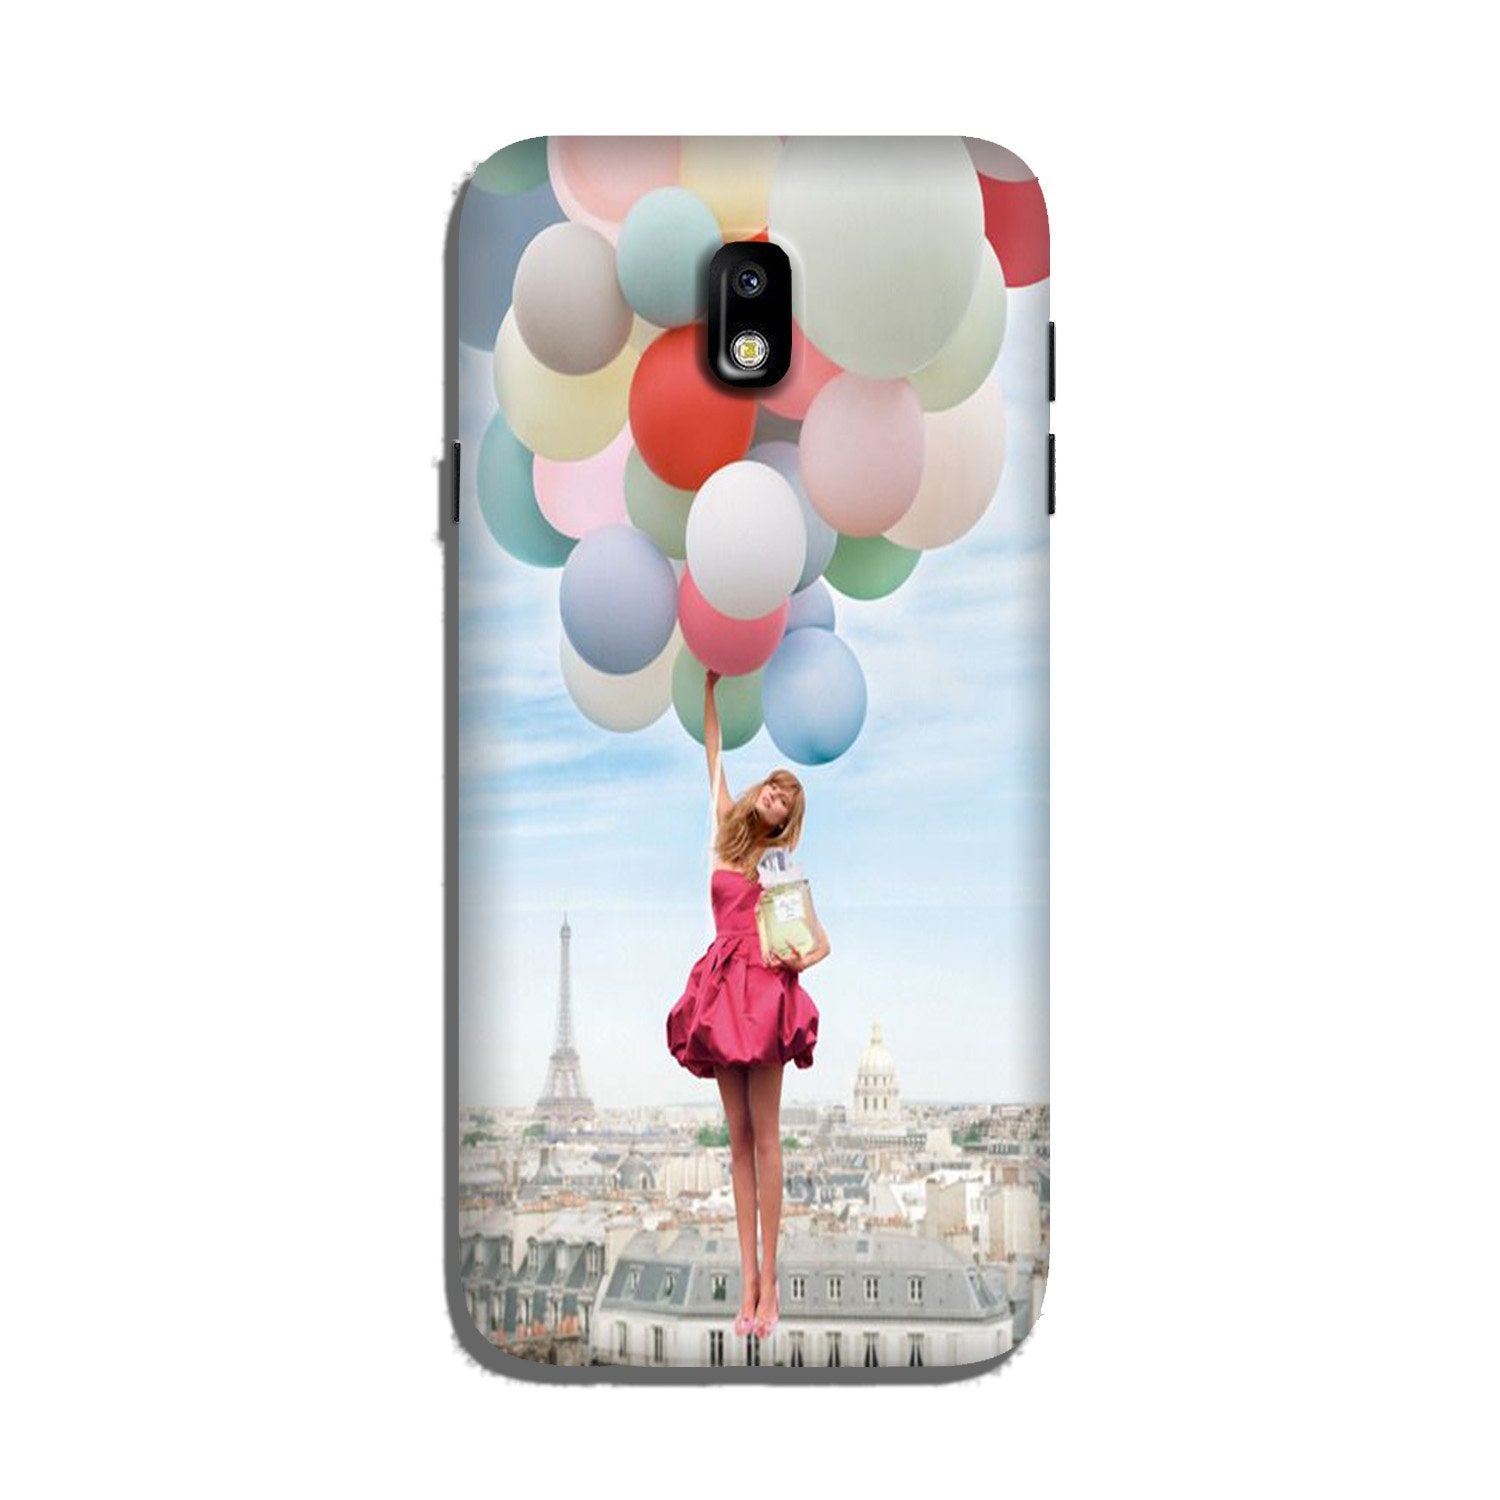 Girl with Baloon Case for Galaxy J3 Pro